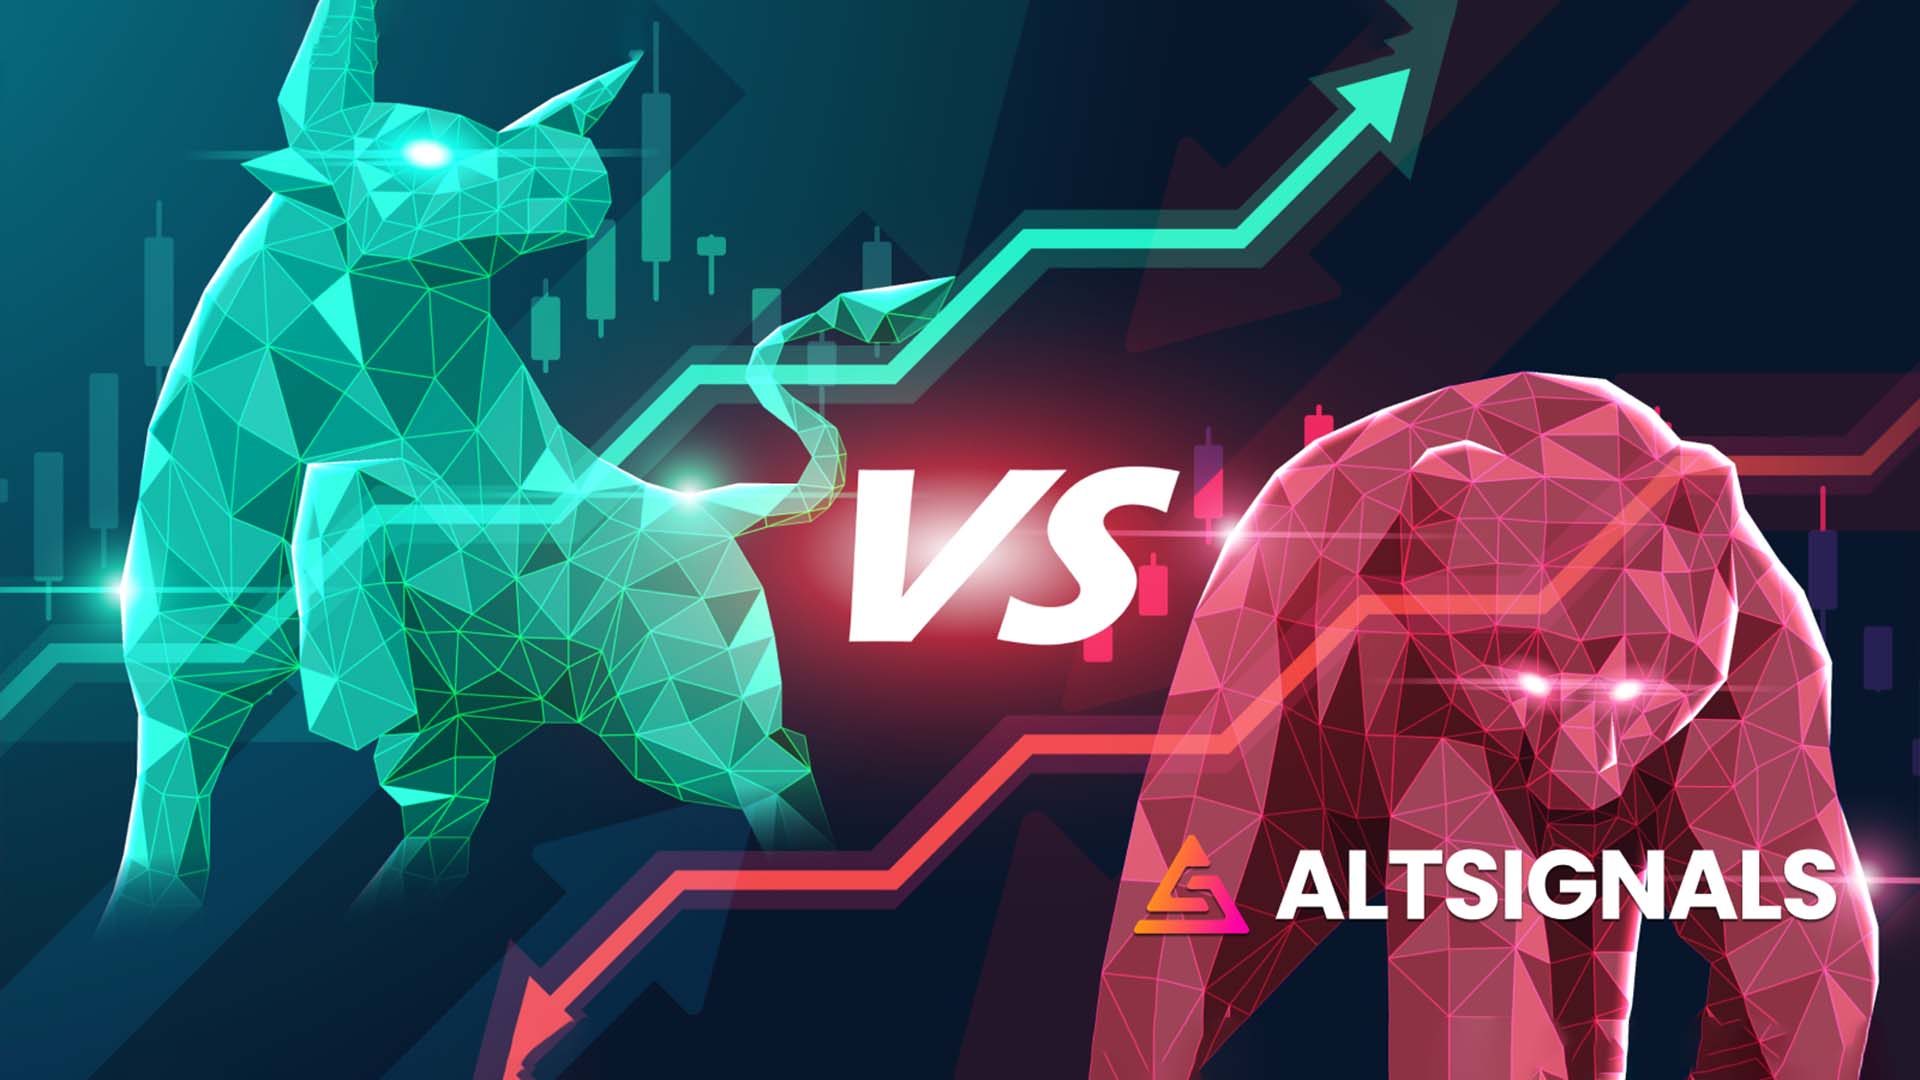 As DeeLance and AltSignals’ Presales Gain Steam, Which Is the Best Investment?